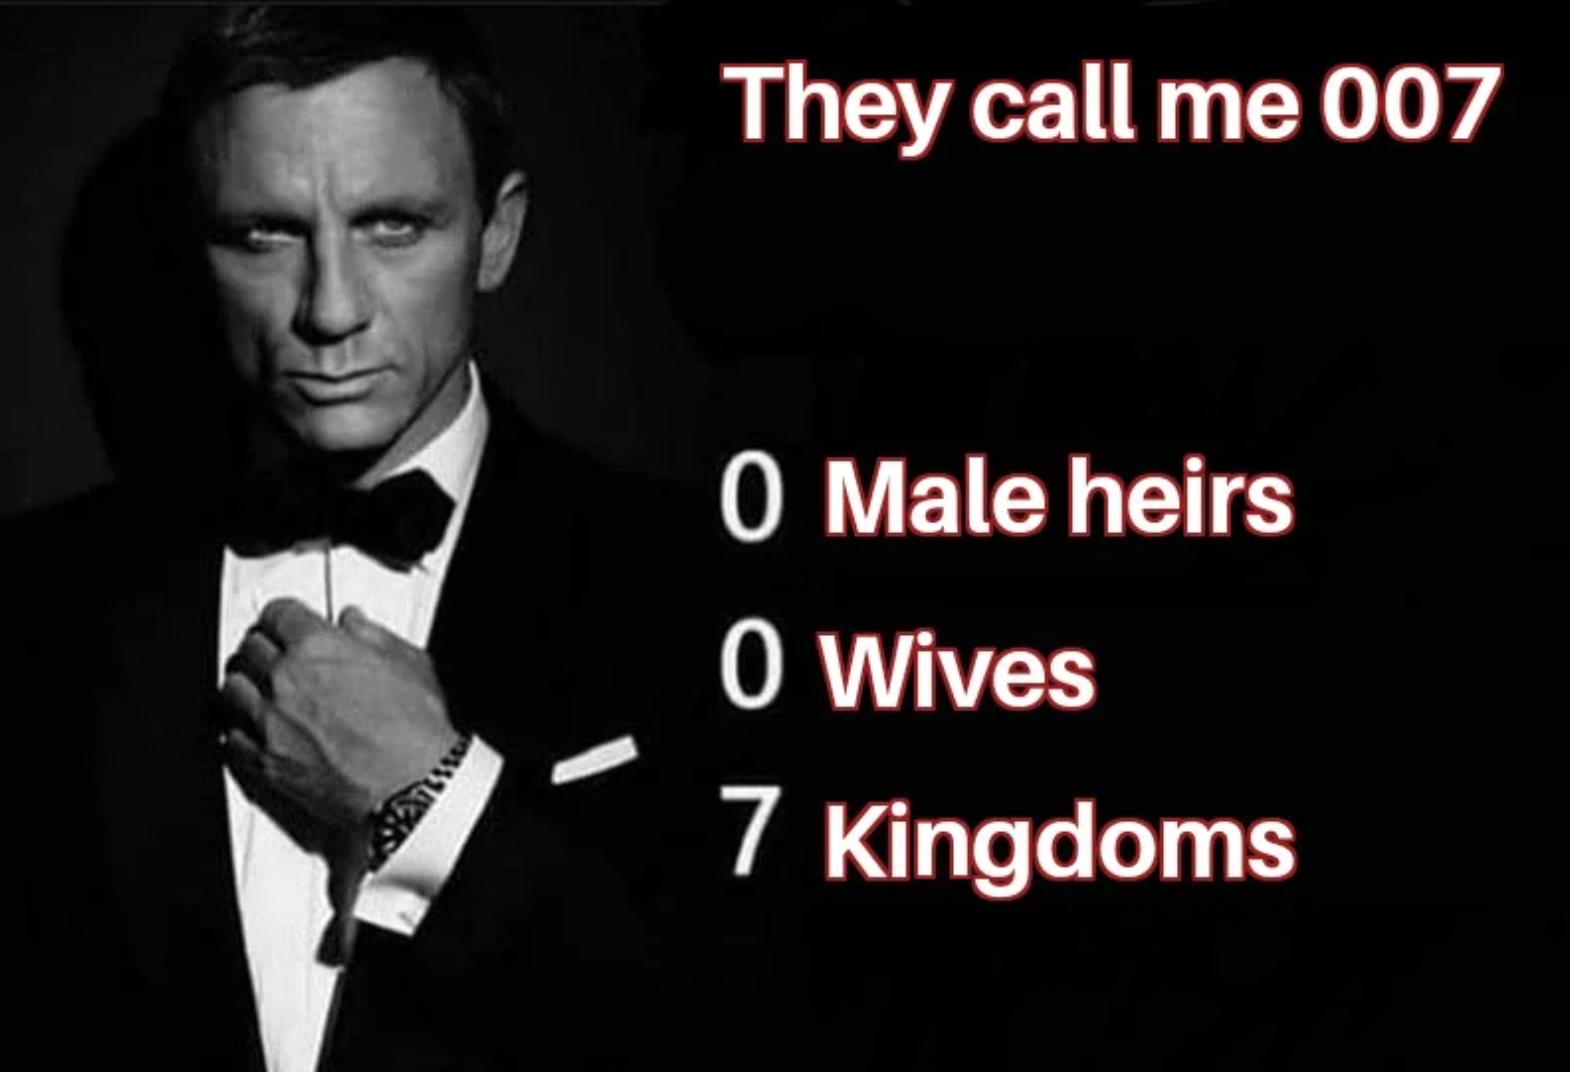 They call me 007 0 Male heirs O Wives 7 Kingdoms